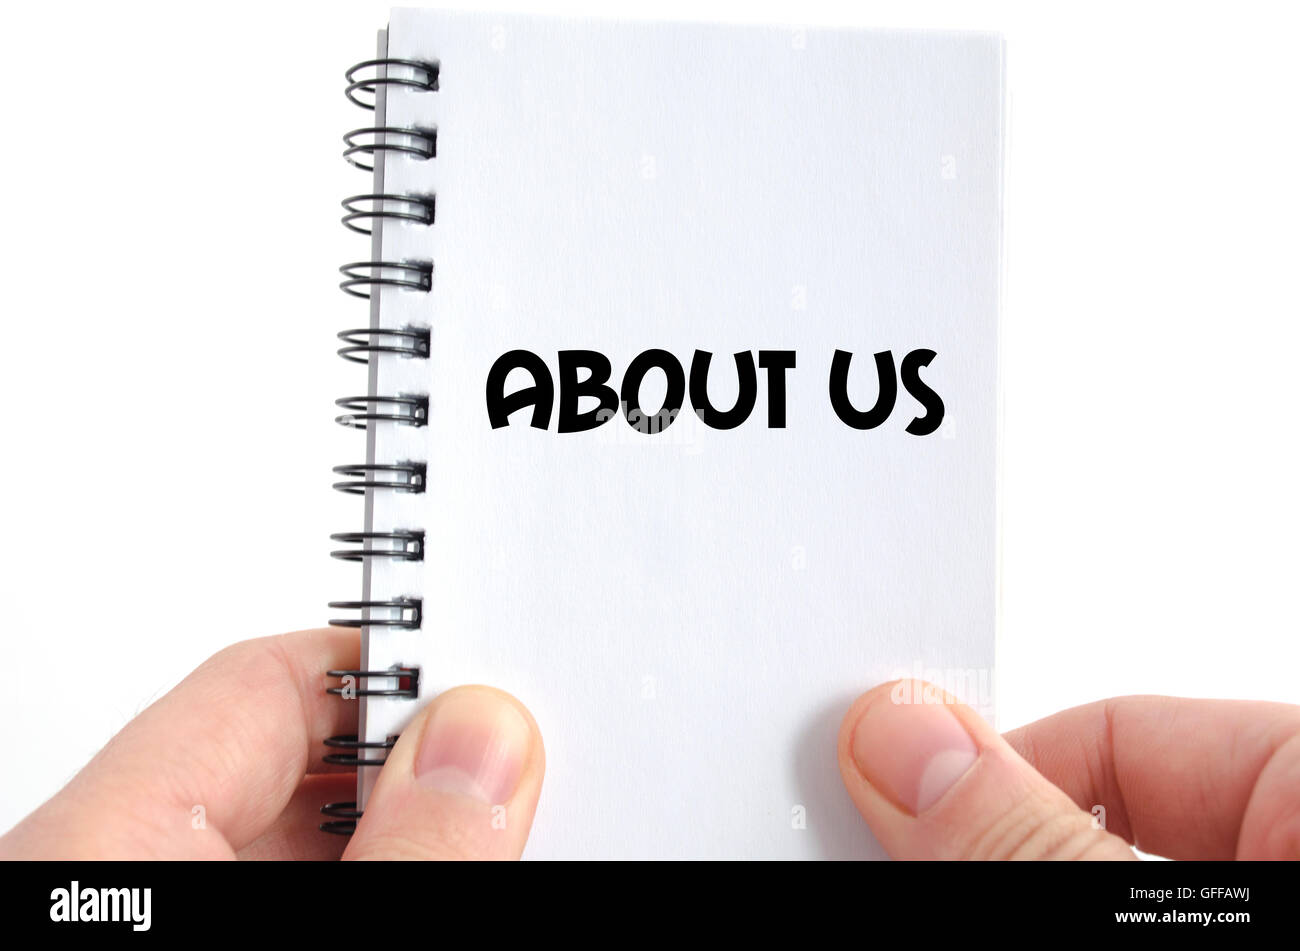 About us text concept isolated over white background Stock Photo